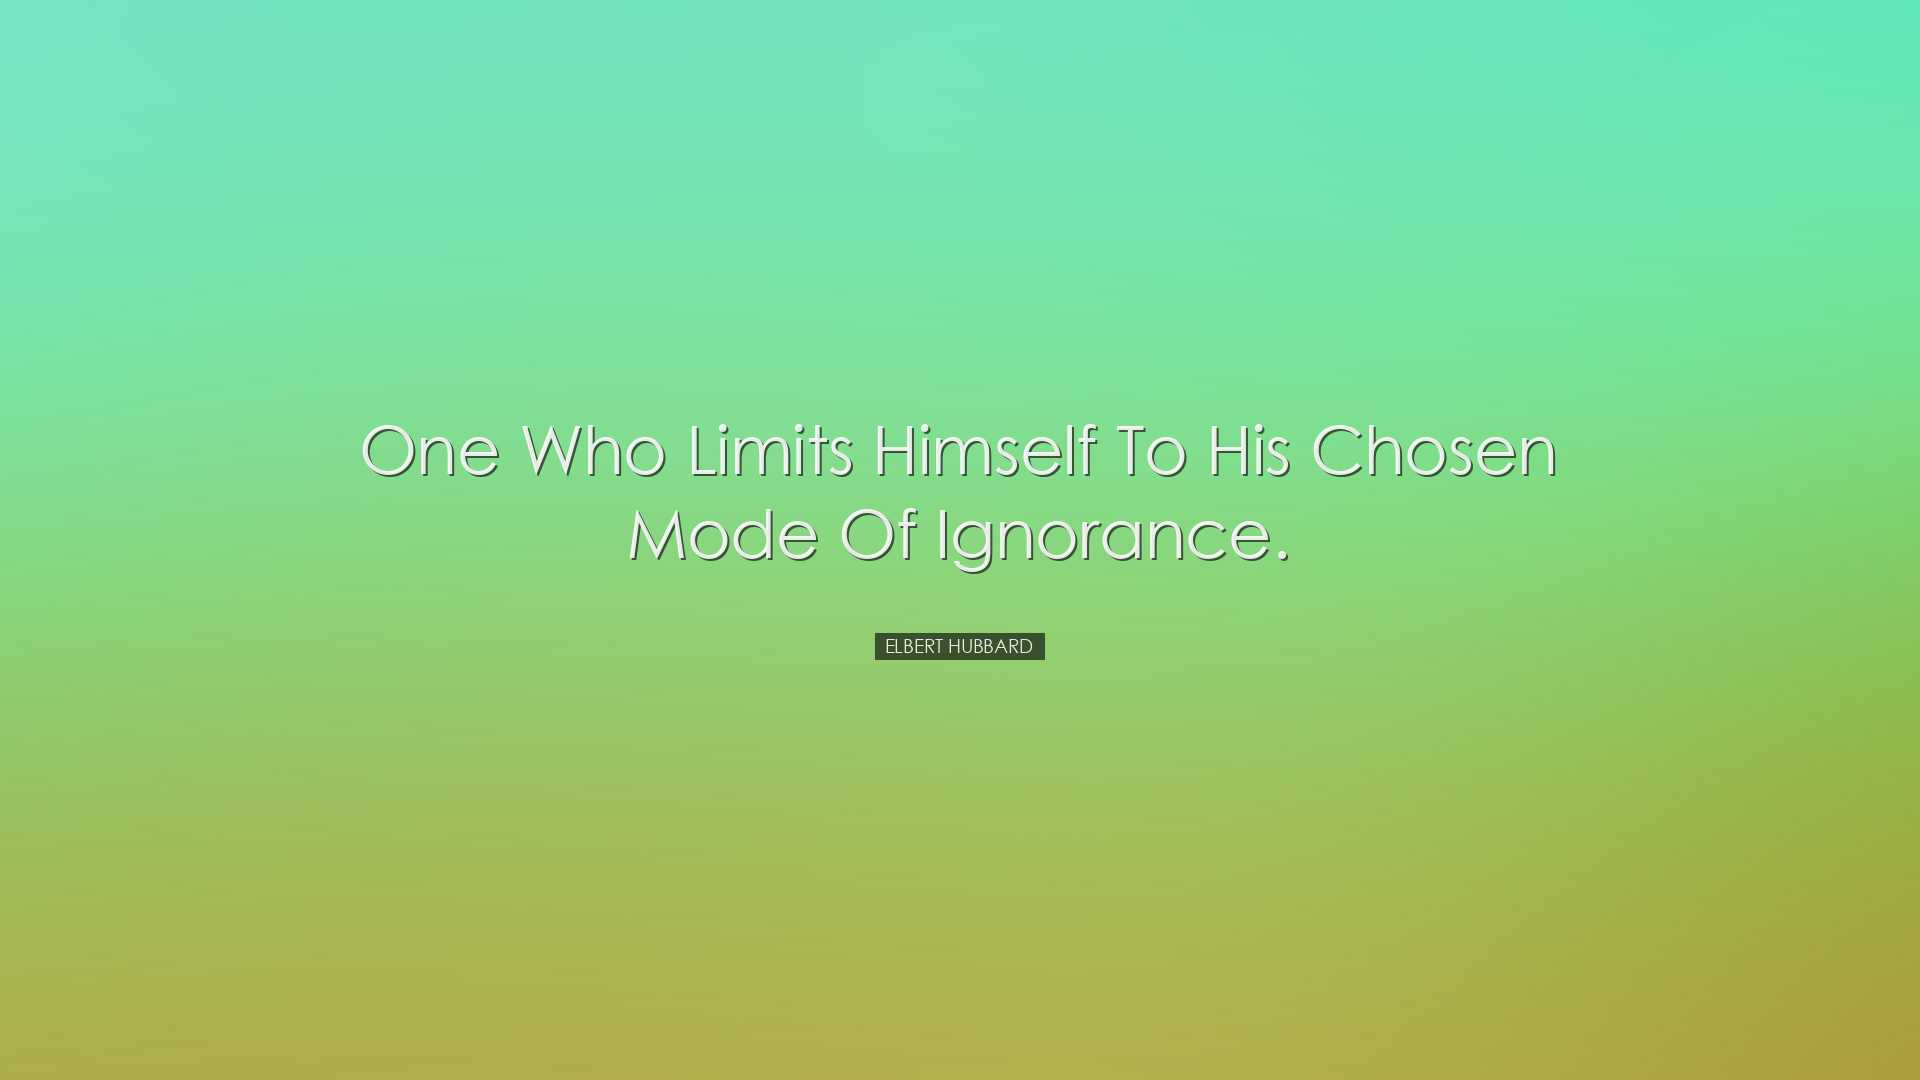 One who limits himself to his chosen mode of ignorance. - Elbert H